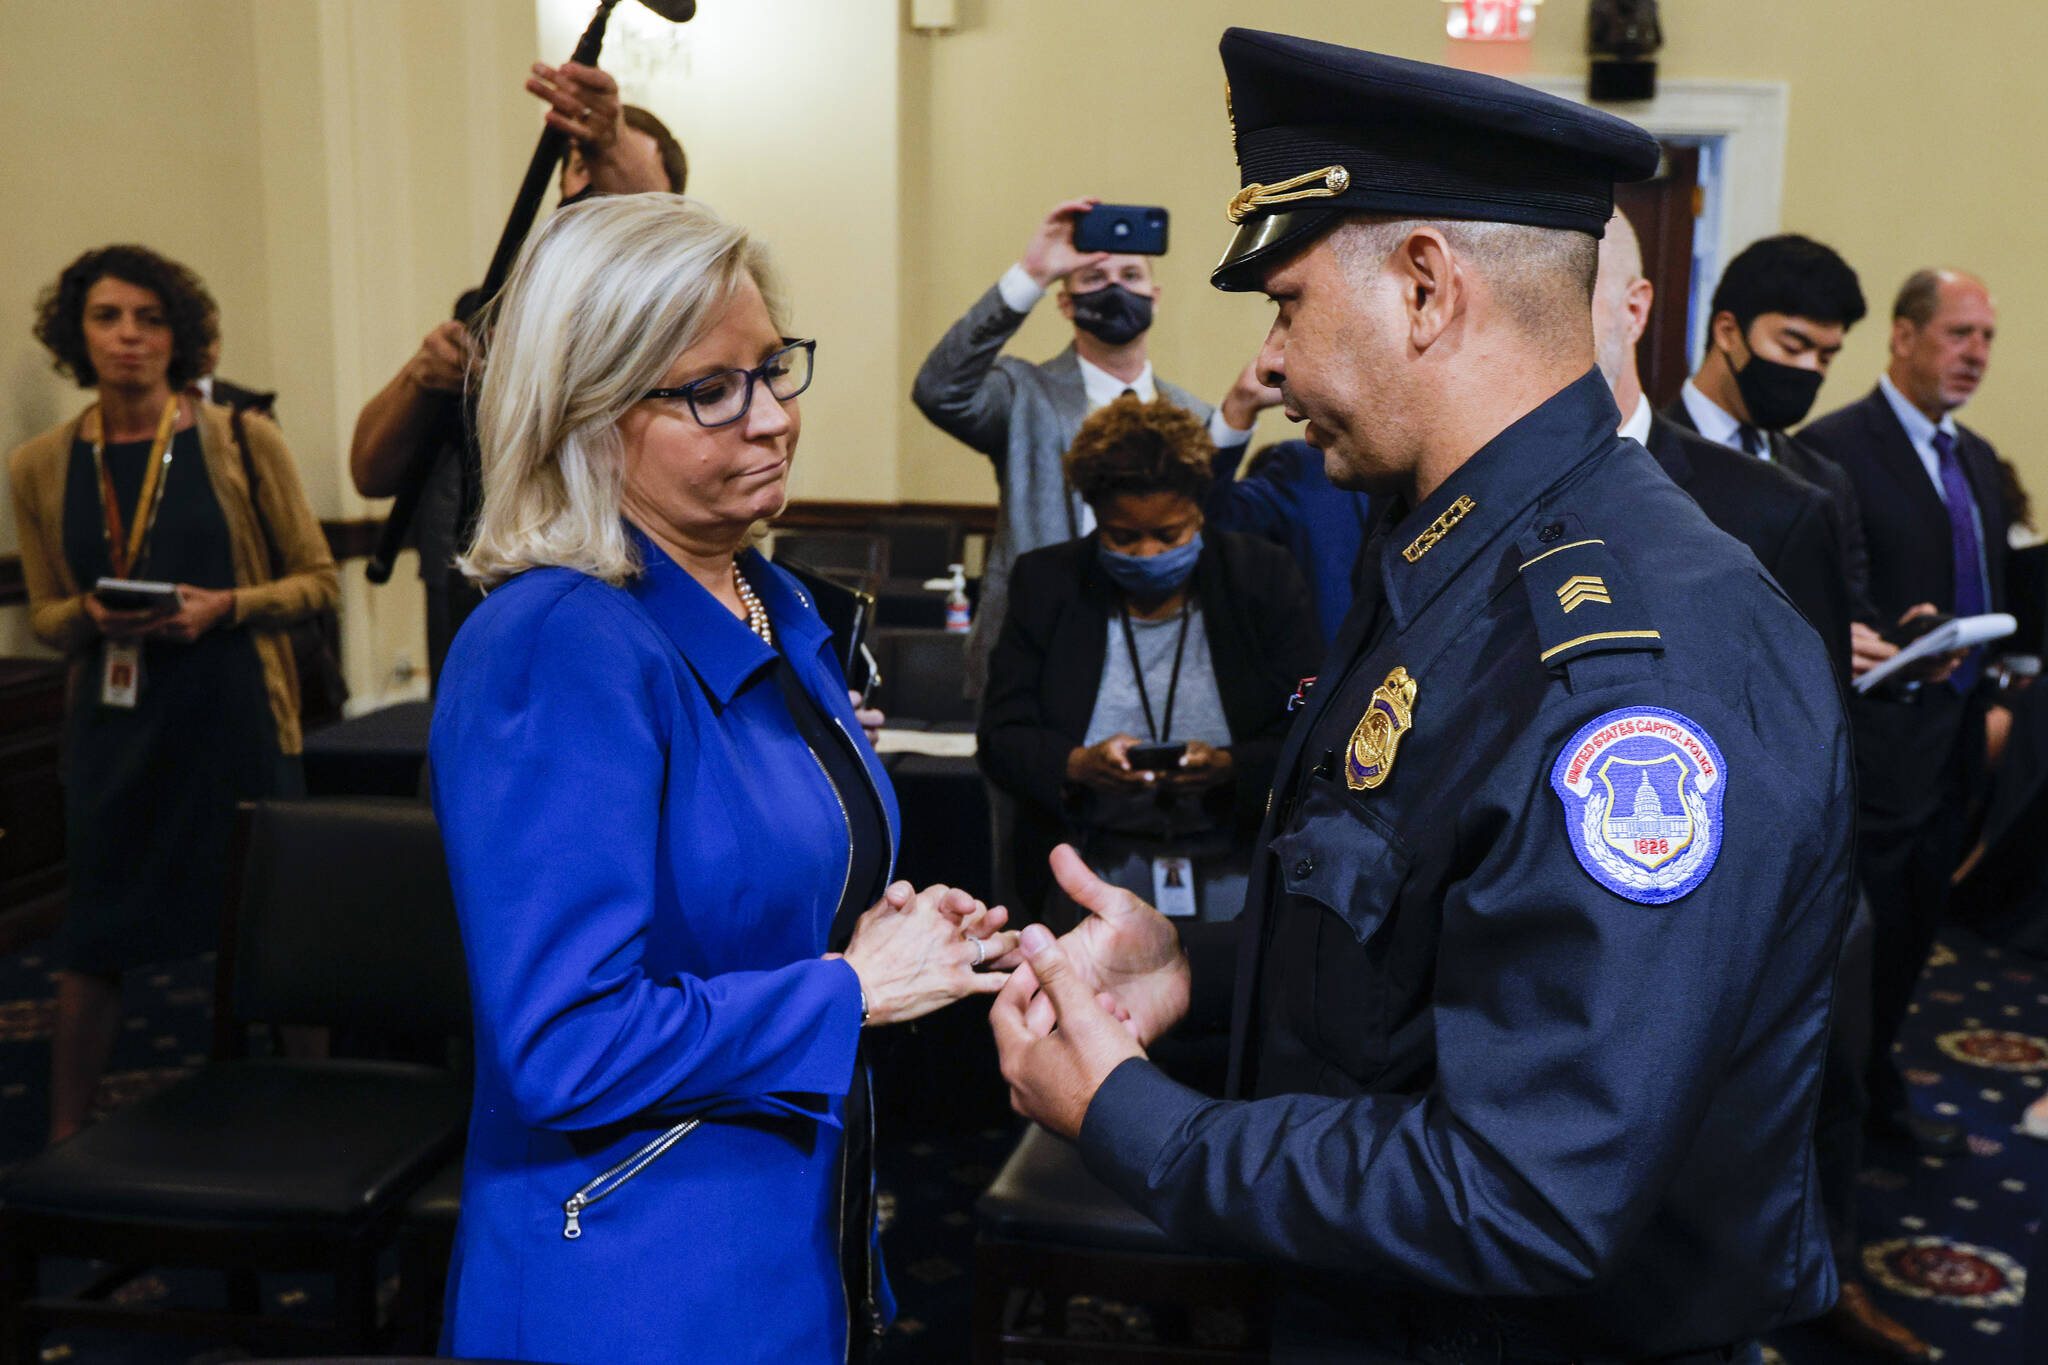 Rep. Liz Cheney, R-Wyo., speaks with U.S. Capitol Police Sgt. Aquilino Gonell after a House select committee hearing on the Jan. 6 attack on Capitol Hill in Washington, on July 27, 2021. (Jim Bourg/Pool via AP, File)